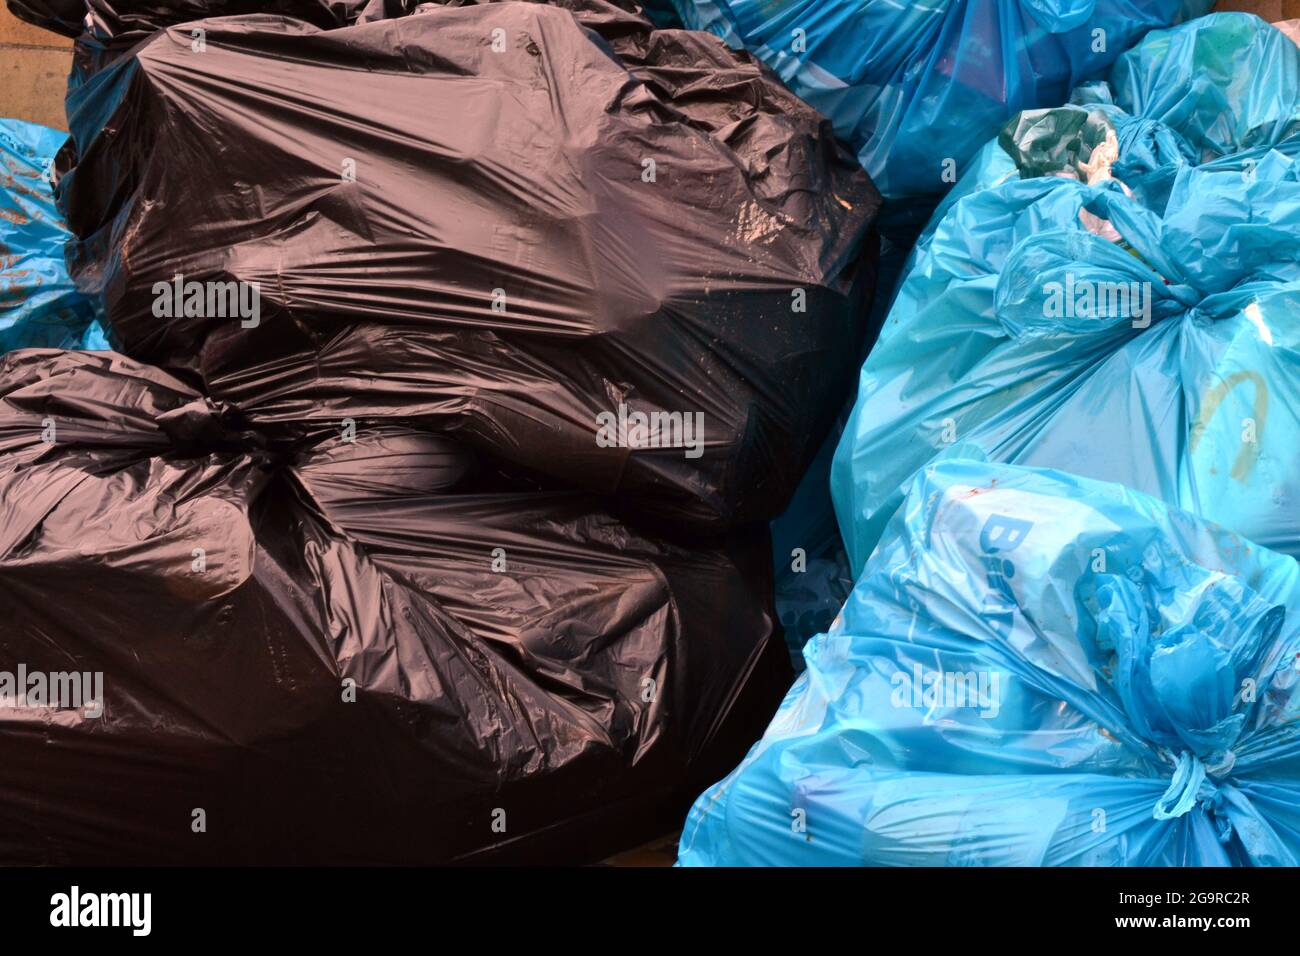 https://c8.alamy.com/comp/2G9RC2R/a-pole-of-full-black-and-blue-rubbish-bags-2G9RC2R.jpg